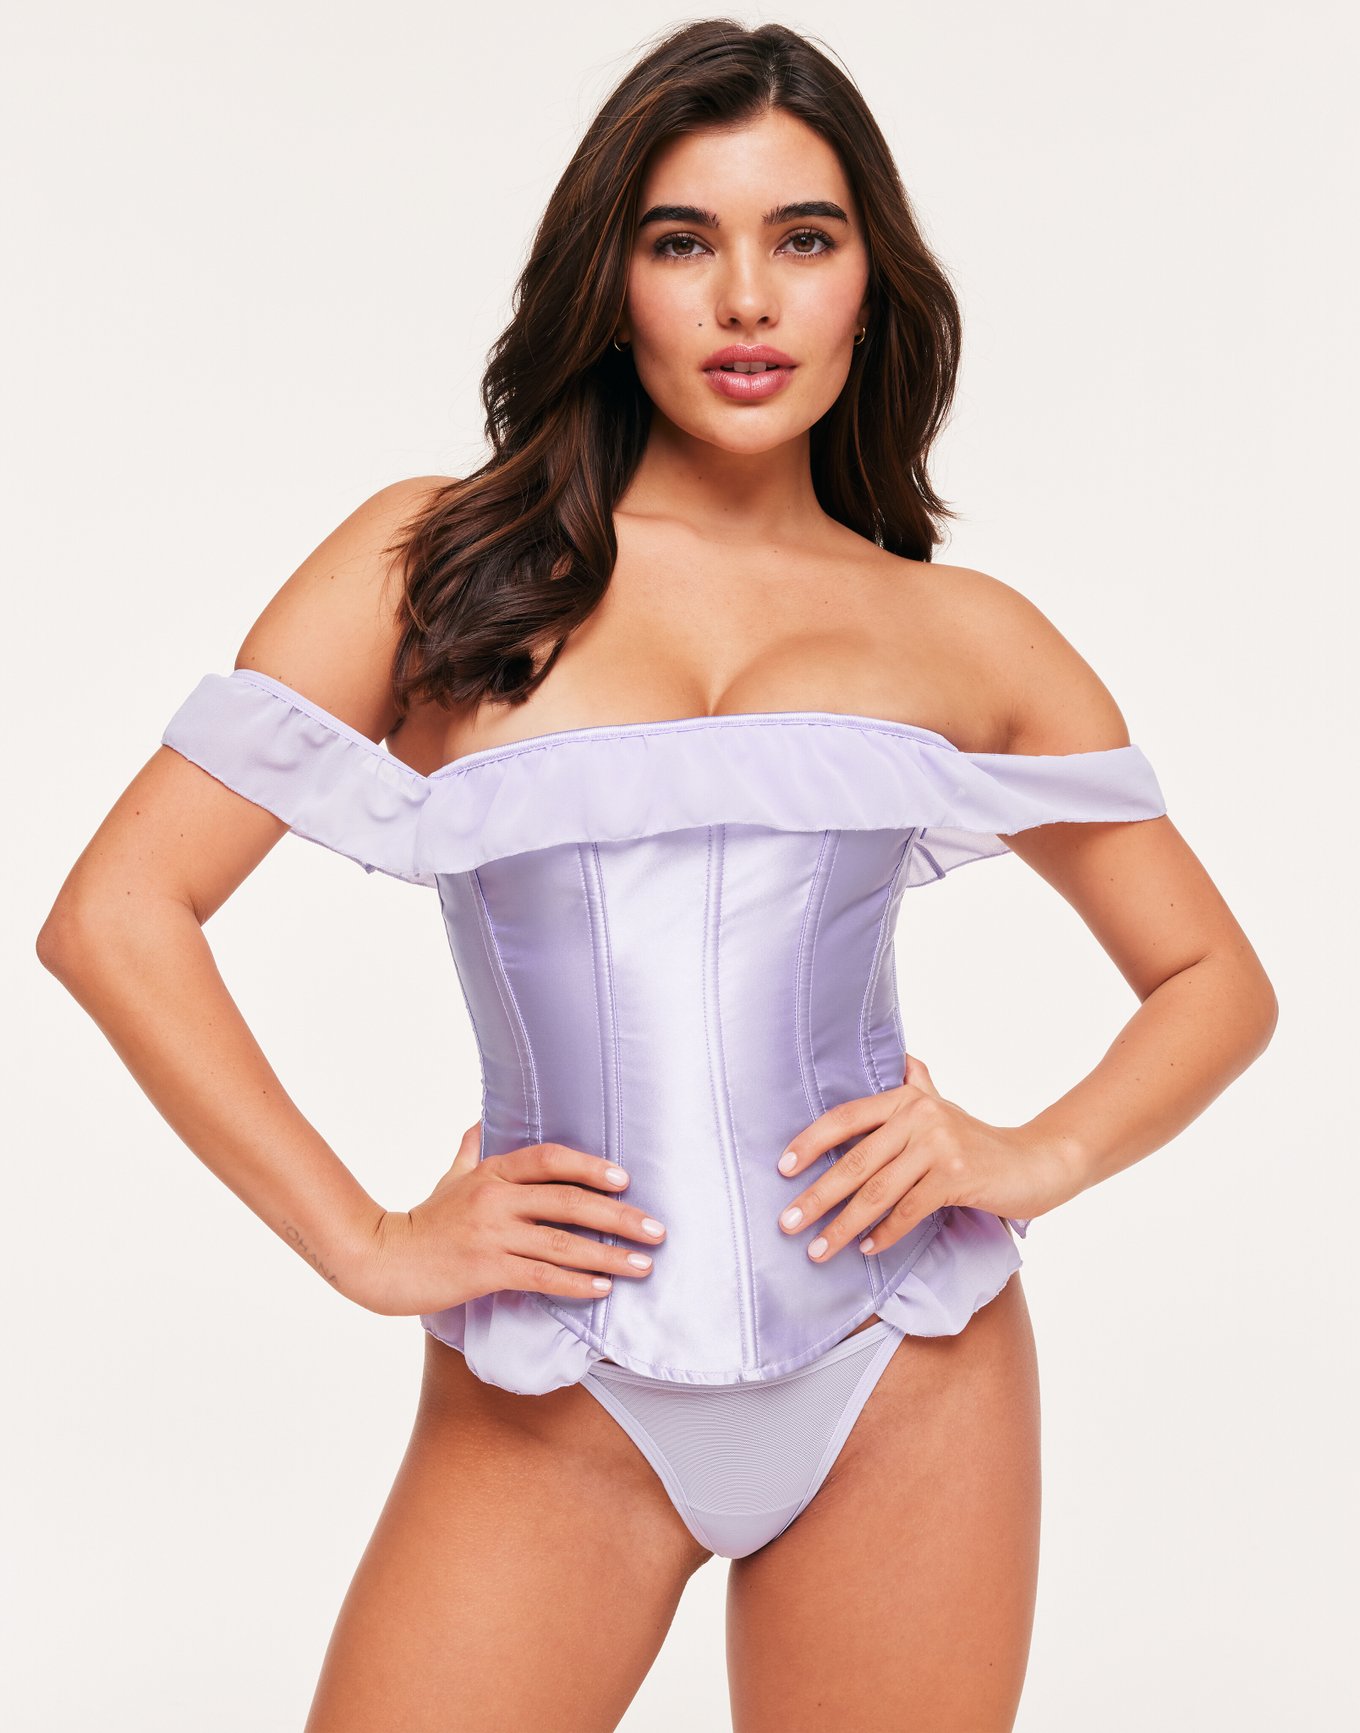 Coco Top - XXL  Bustier top outfits, Leather bustier, Corset